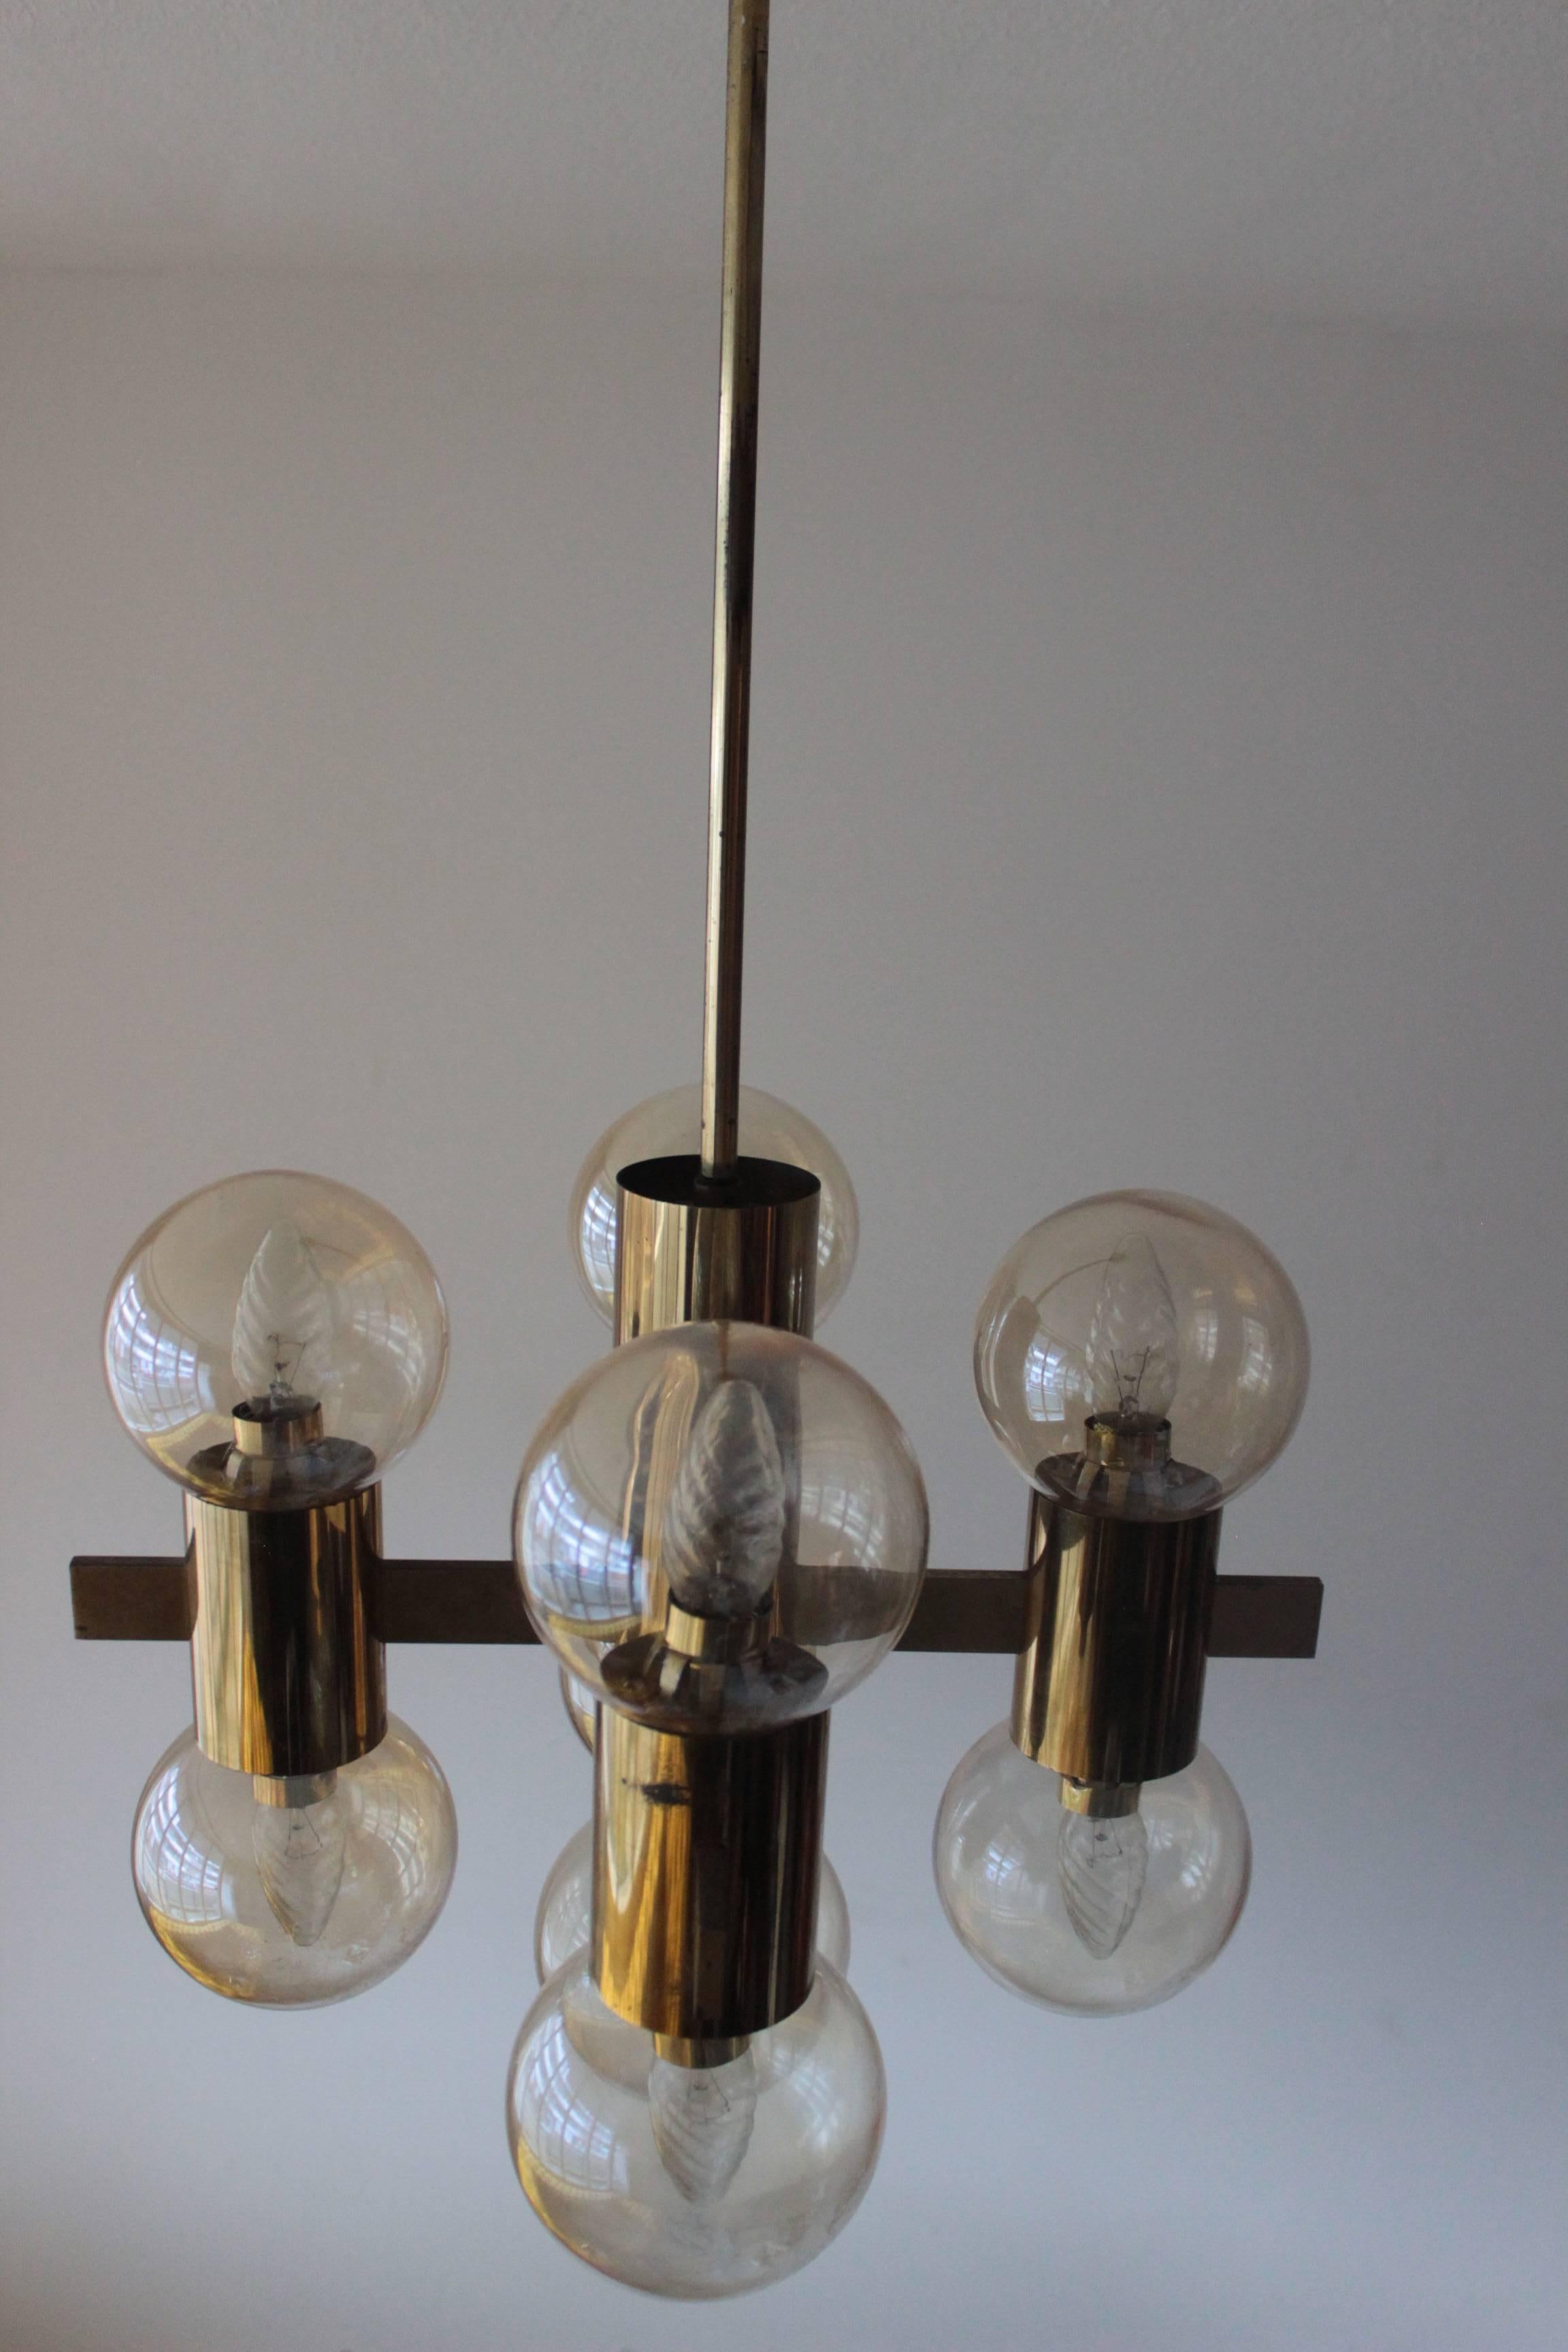 Rare Sciolari chandelier in brass nine sockets with nine smoked glass globes.
We have a total of three chandeliers, of this rare Sciolari design 2 x 9 smoked brass glass chandeliers, and one Sciolari chandelier with five smoked glass globes.

 